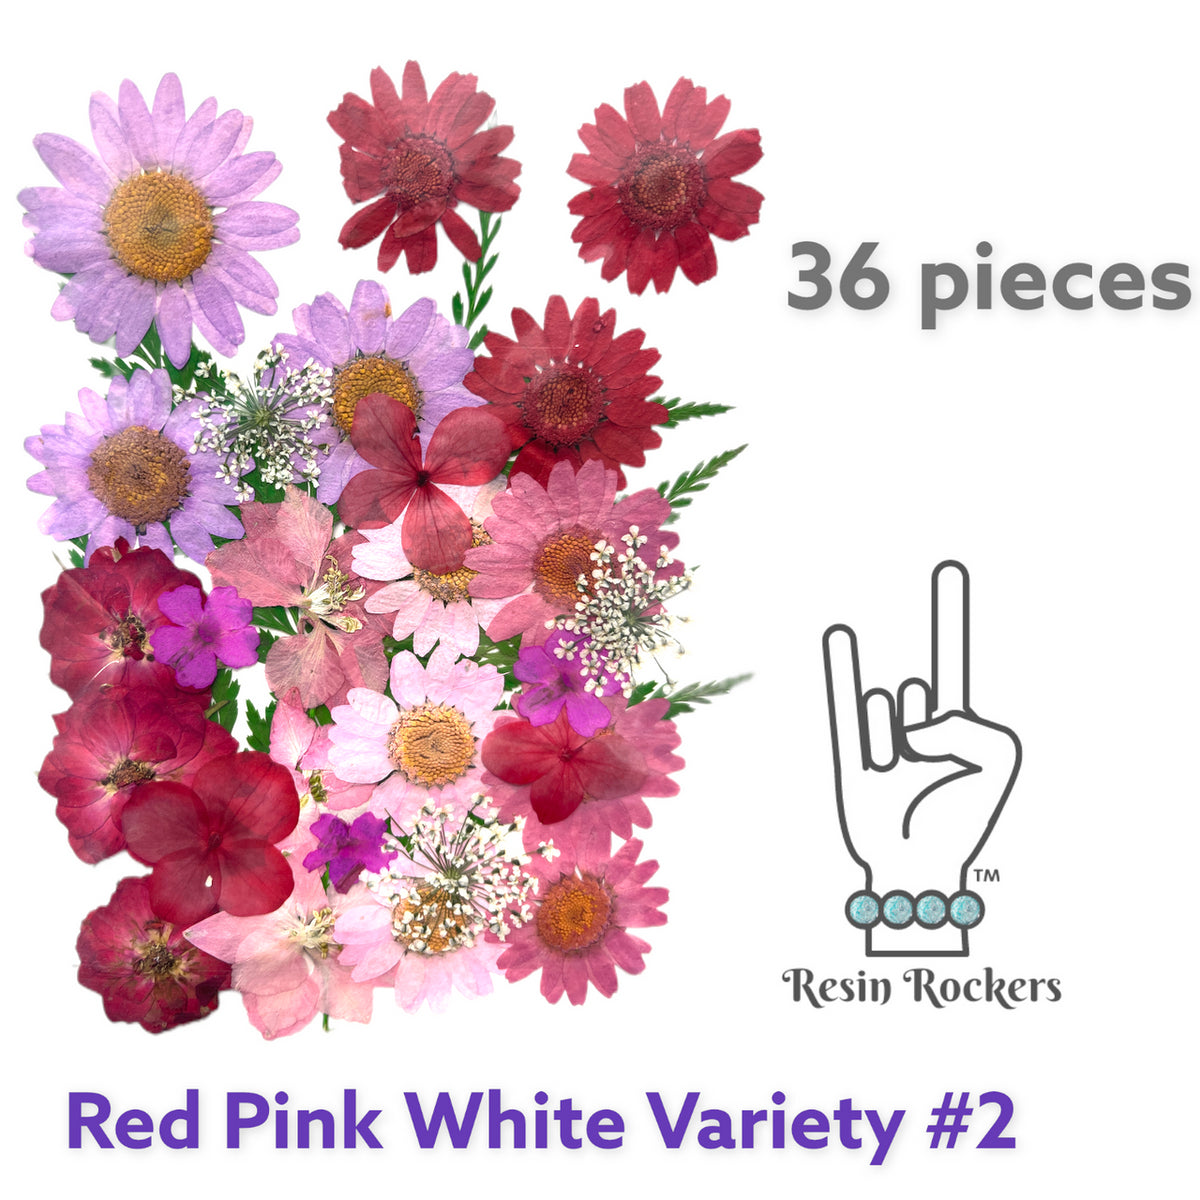 36 Piece Red Pink White Variety #2 Dried Pressed Real Natural Flowers -  Resin Rockers